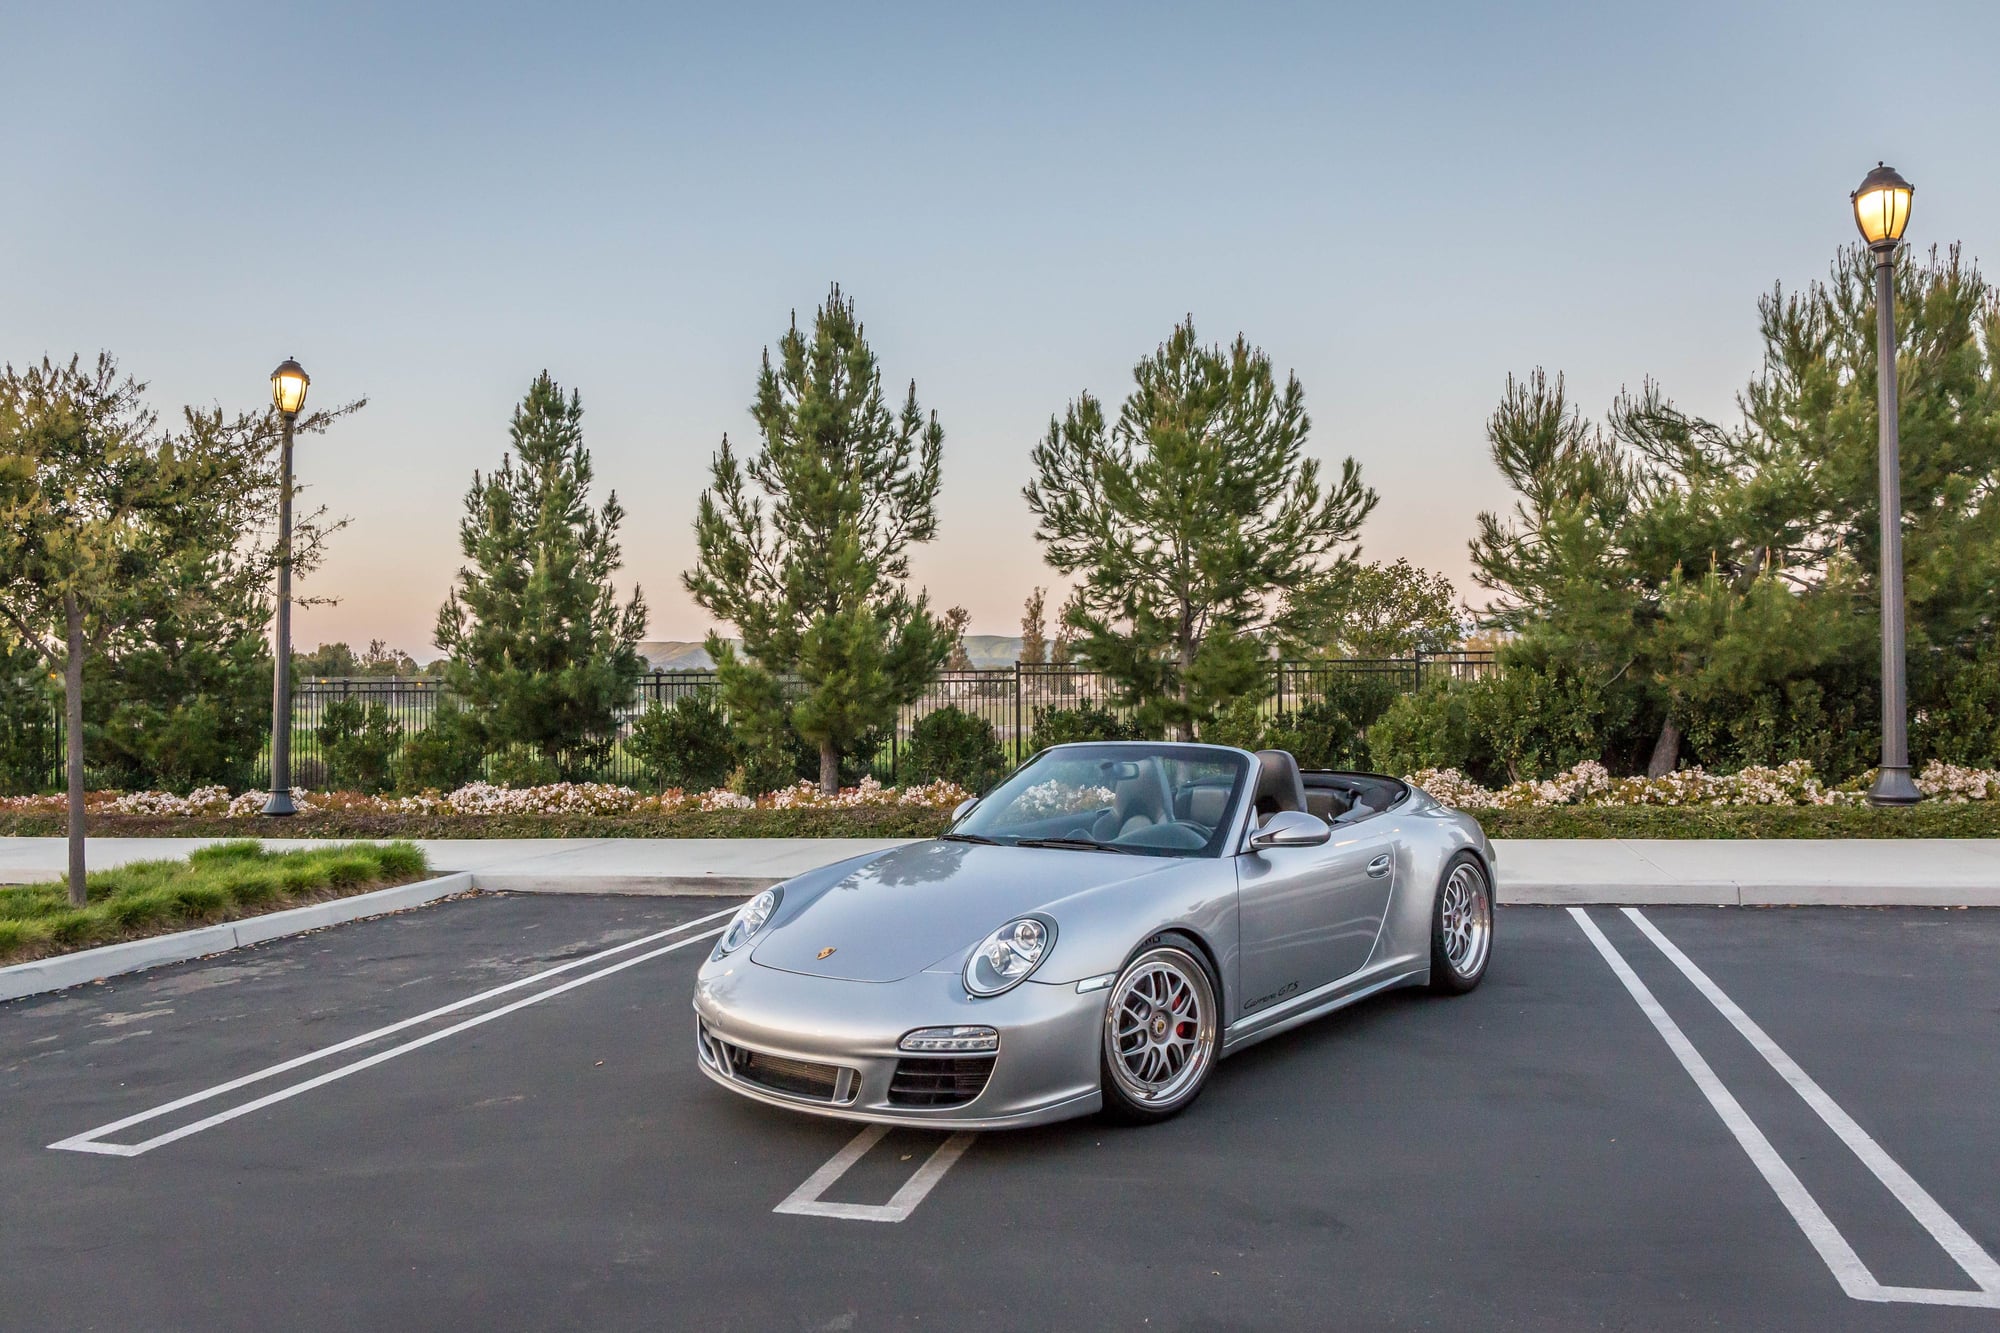 Wheels and Tires/Axles - BBS E07 for widebody 997s with centerlocks, GTS, Turbo, Turbo S, GT3RS - Used - 2009 to 2012 Porsche 911 - Irvine, CA 92620, United States